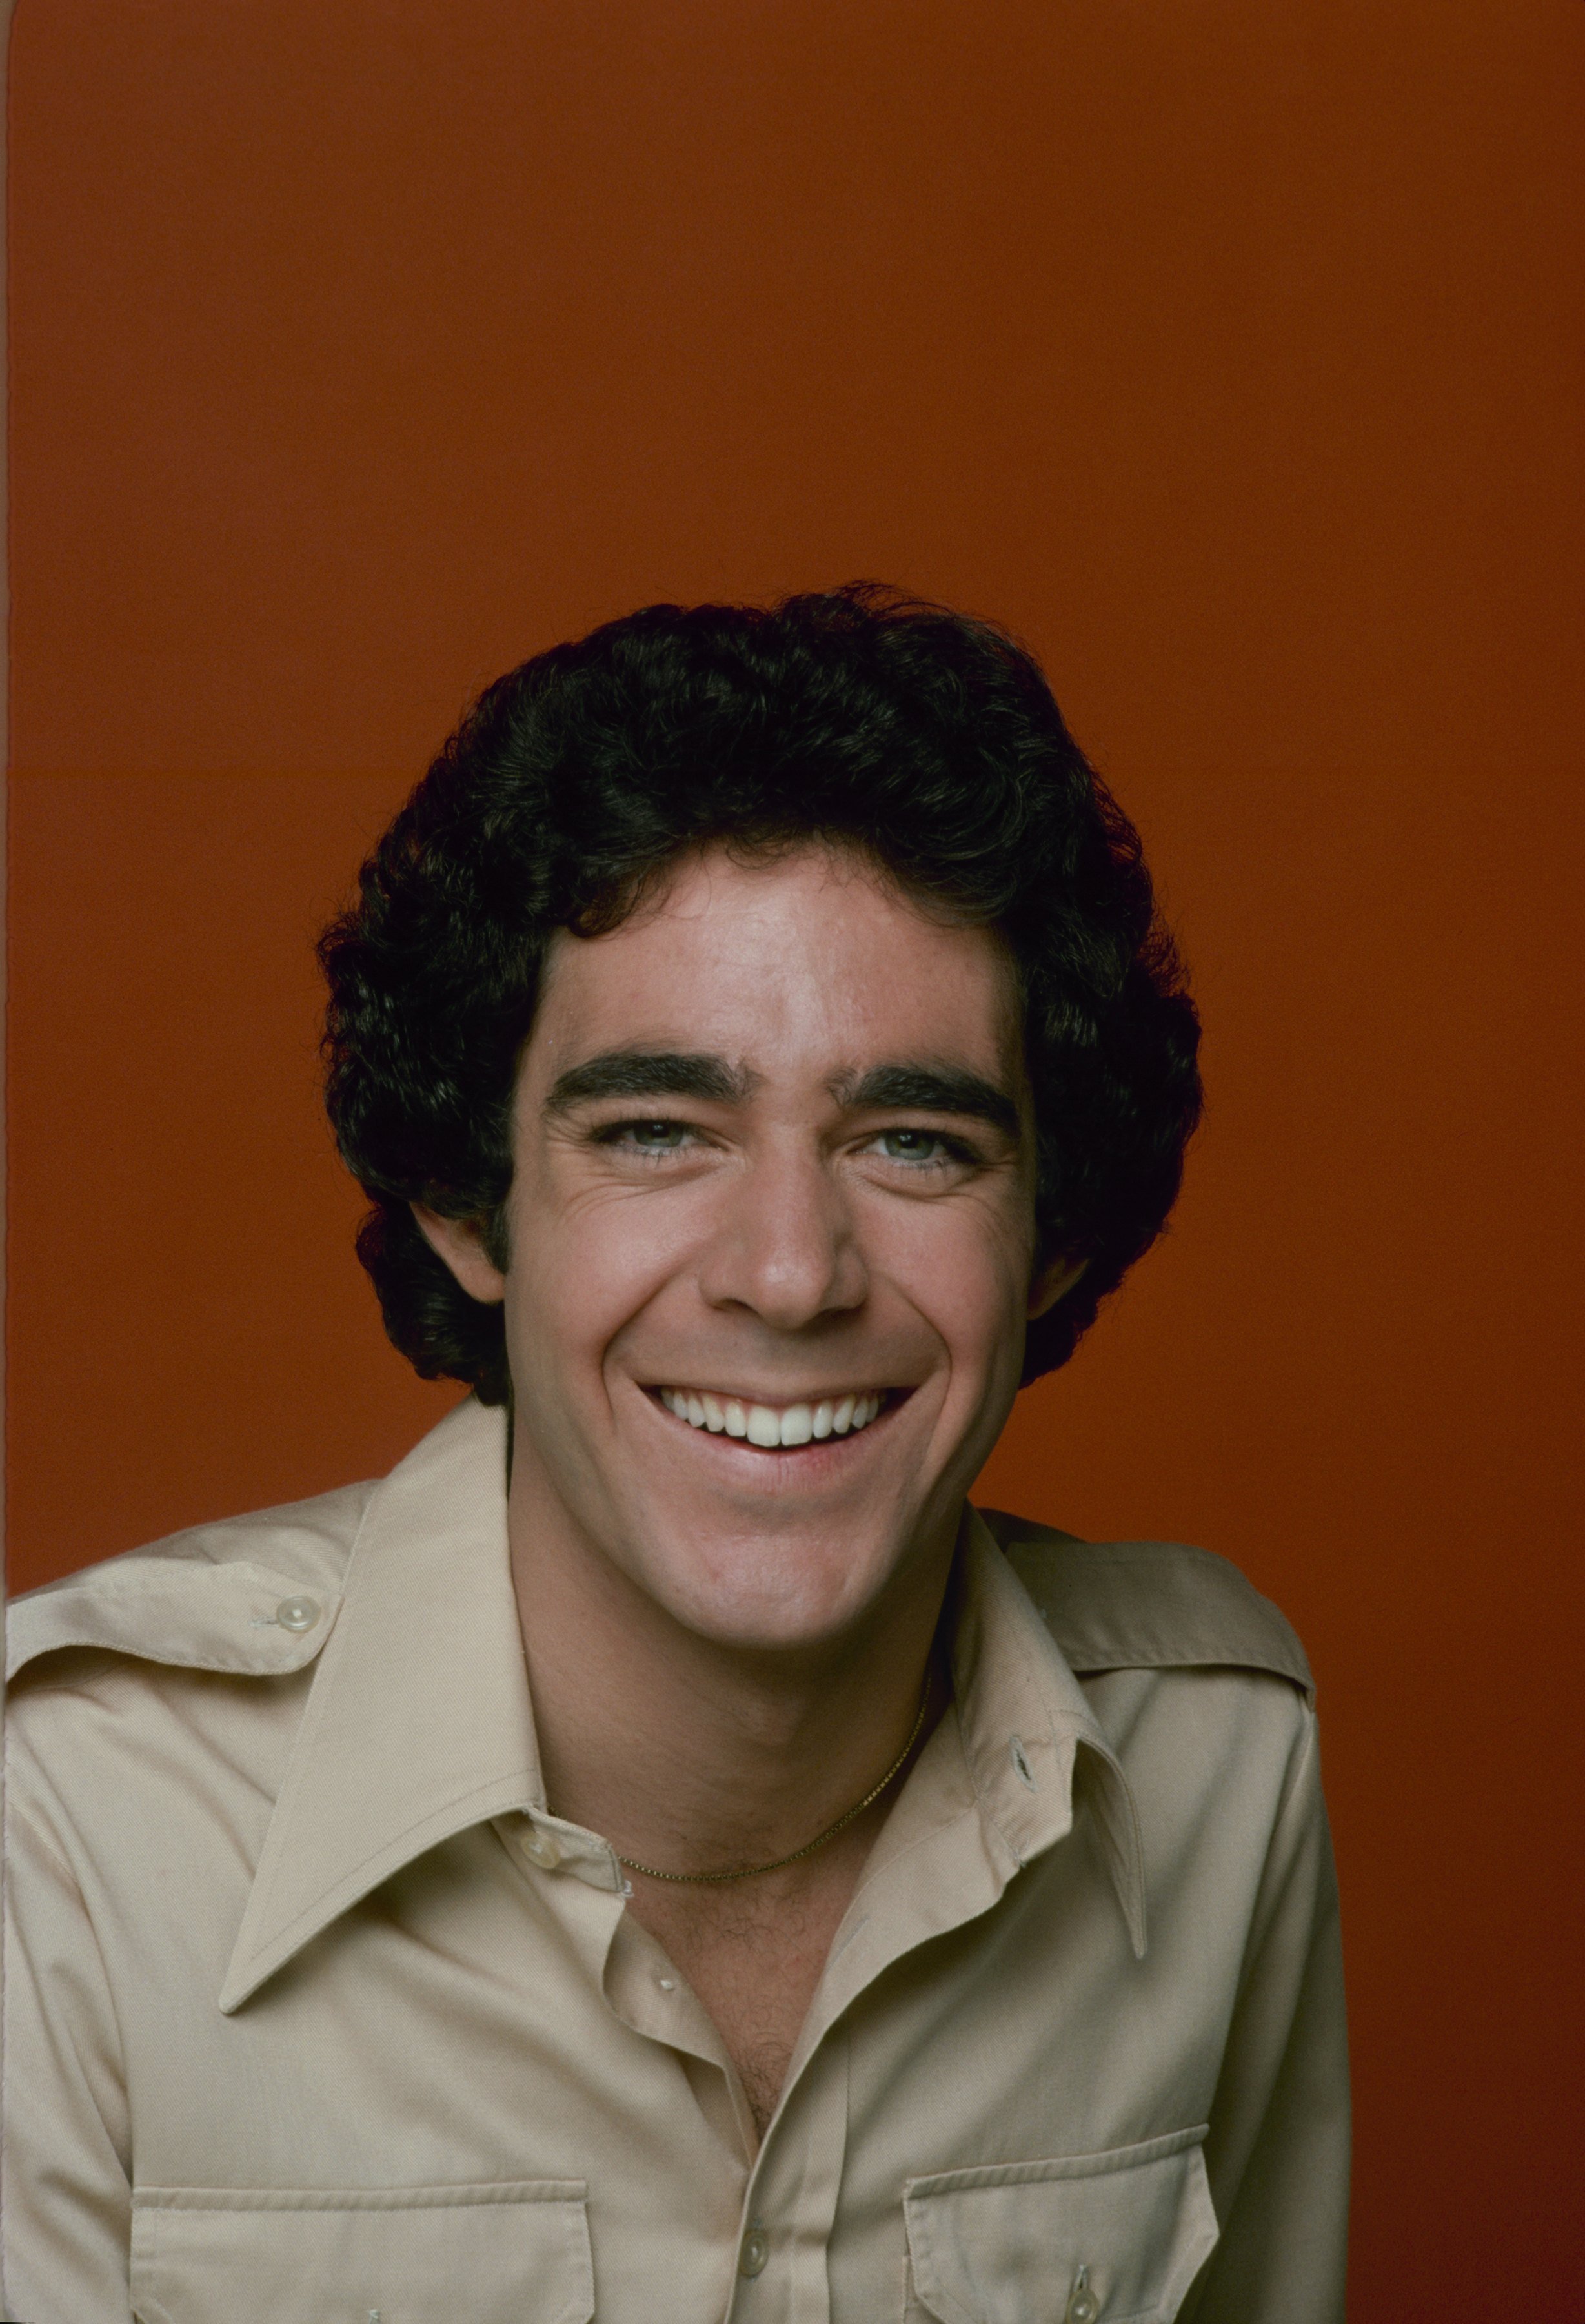 Barry Williams in November 1976 | Source: Getty Images